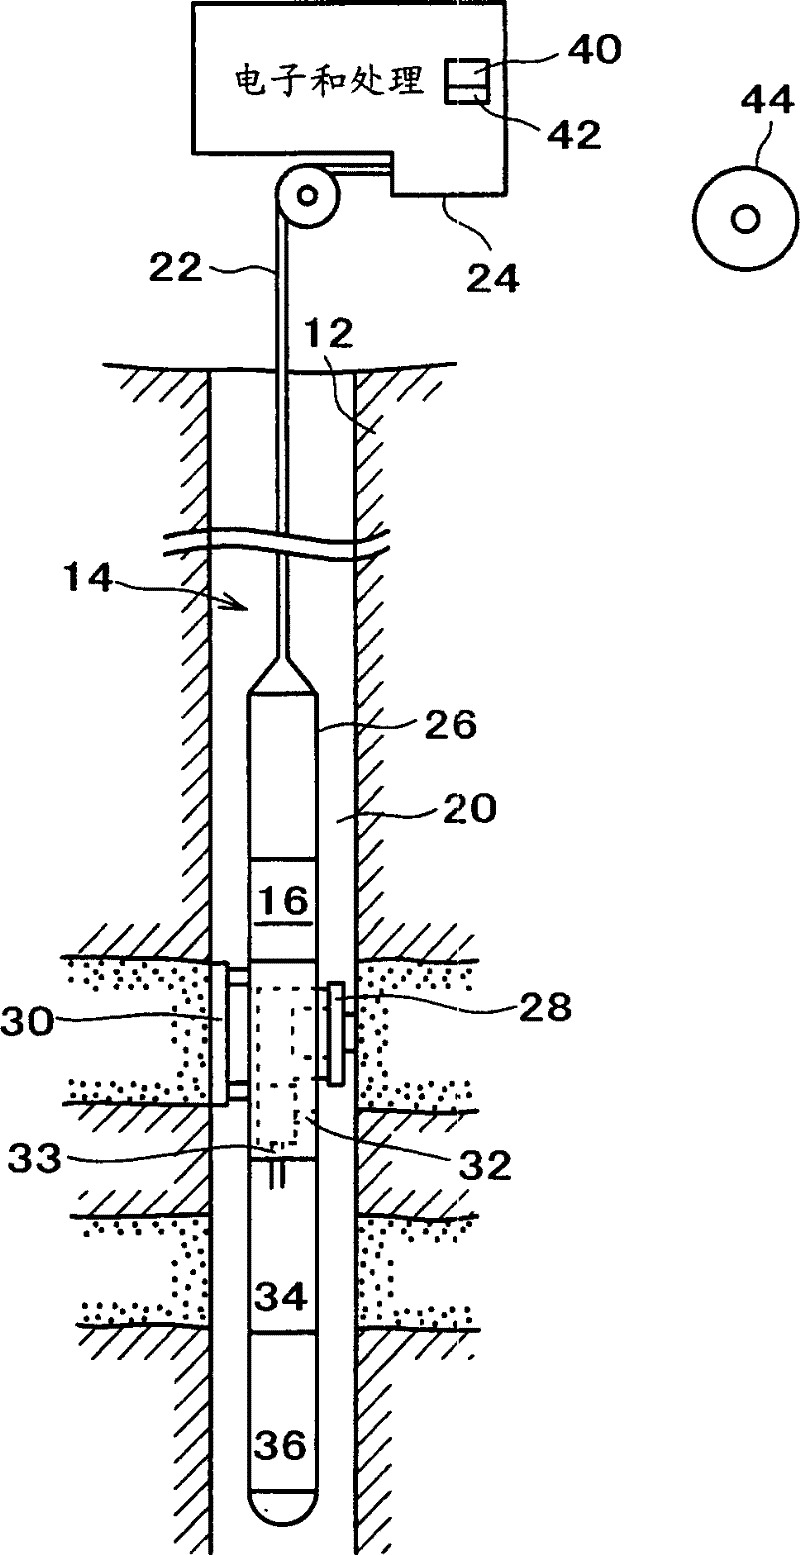 System and methods of deriving fluid properties of downhole fluids and uncertainty thereof